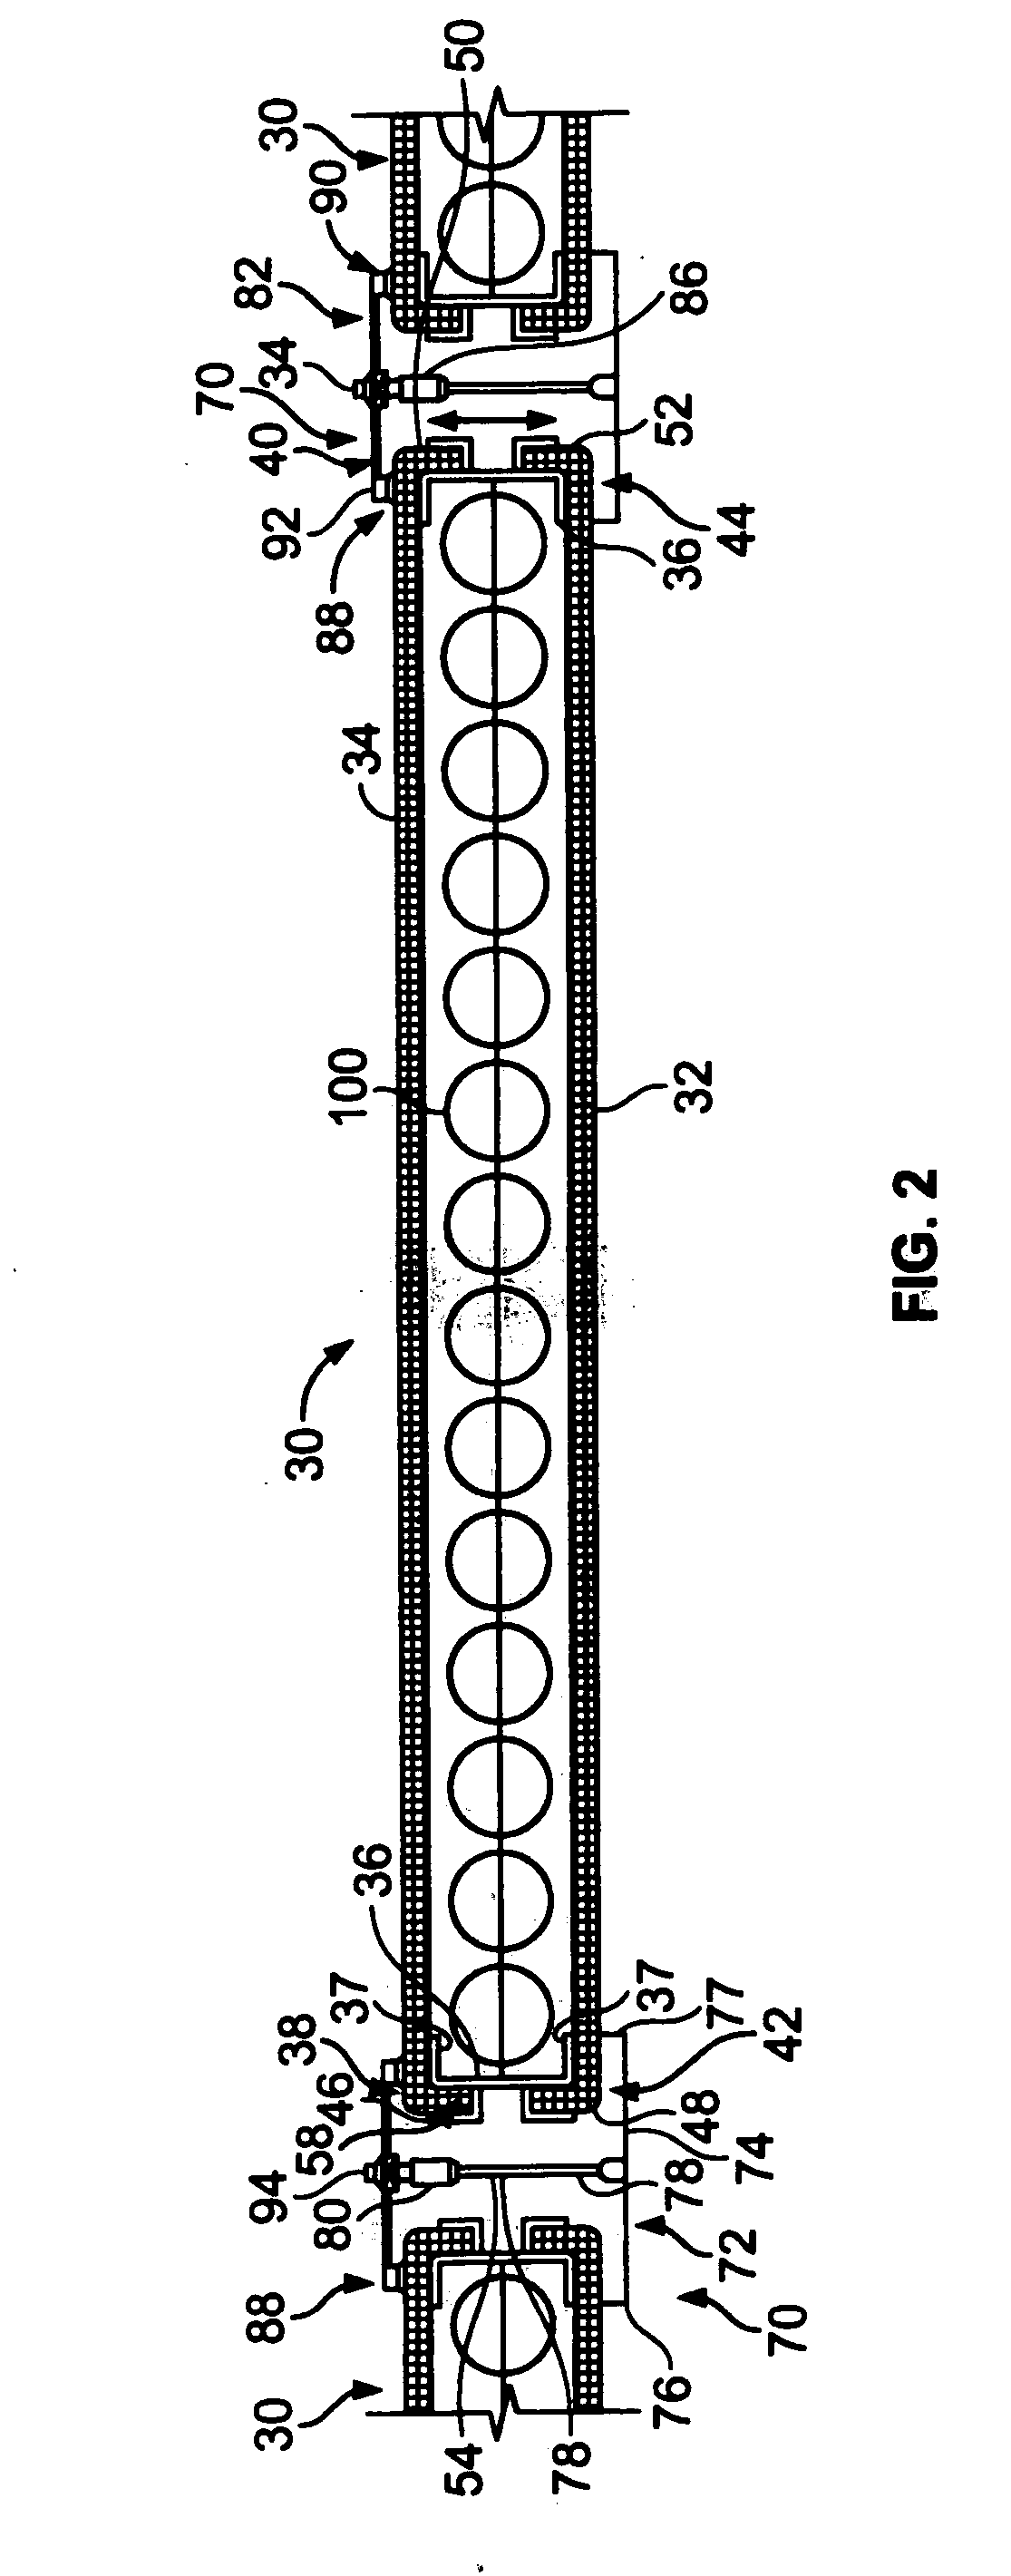 Method and apparatus for selective solar control